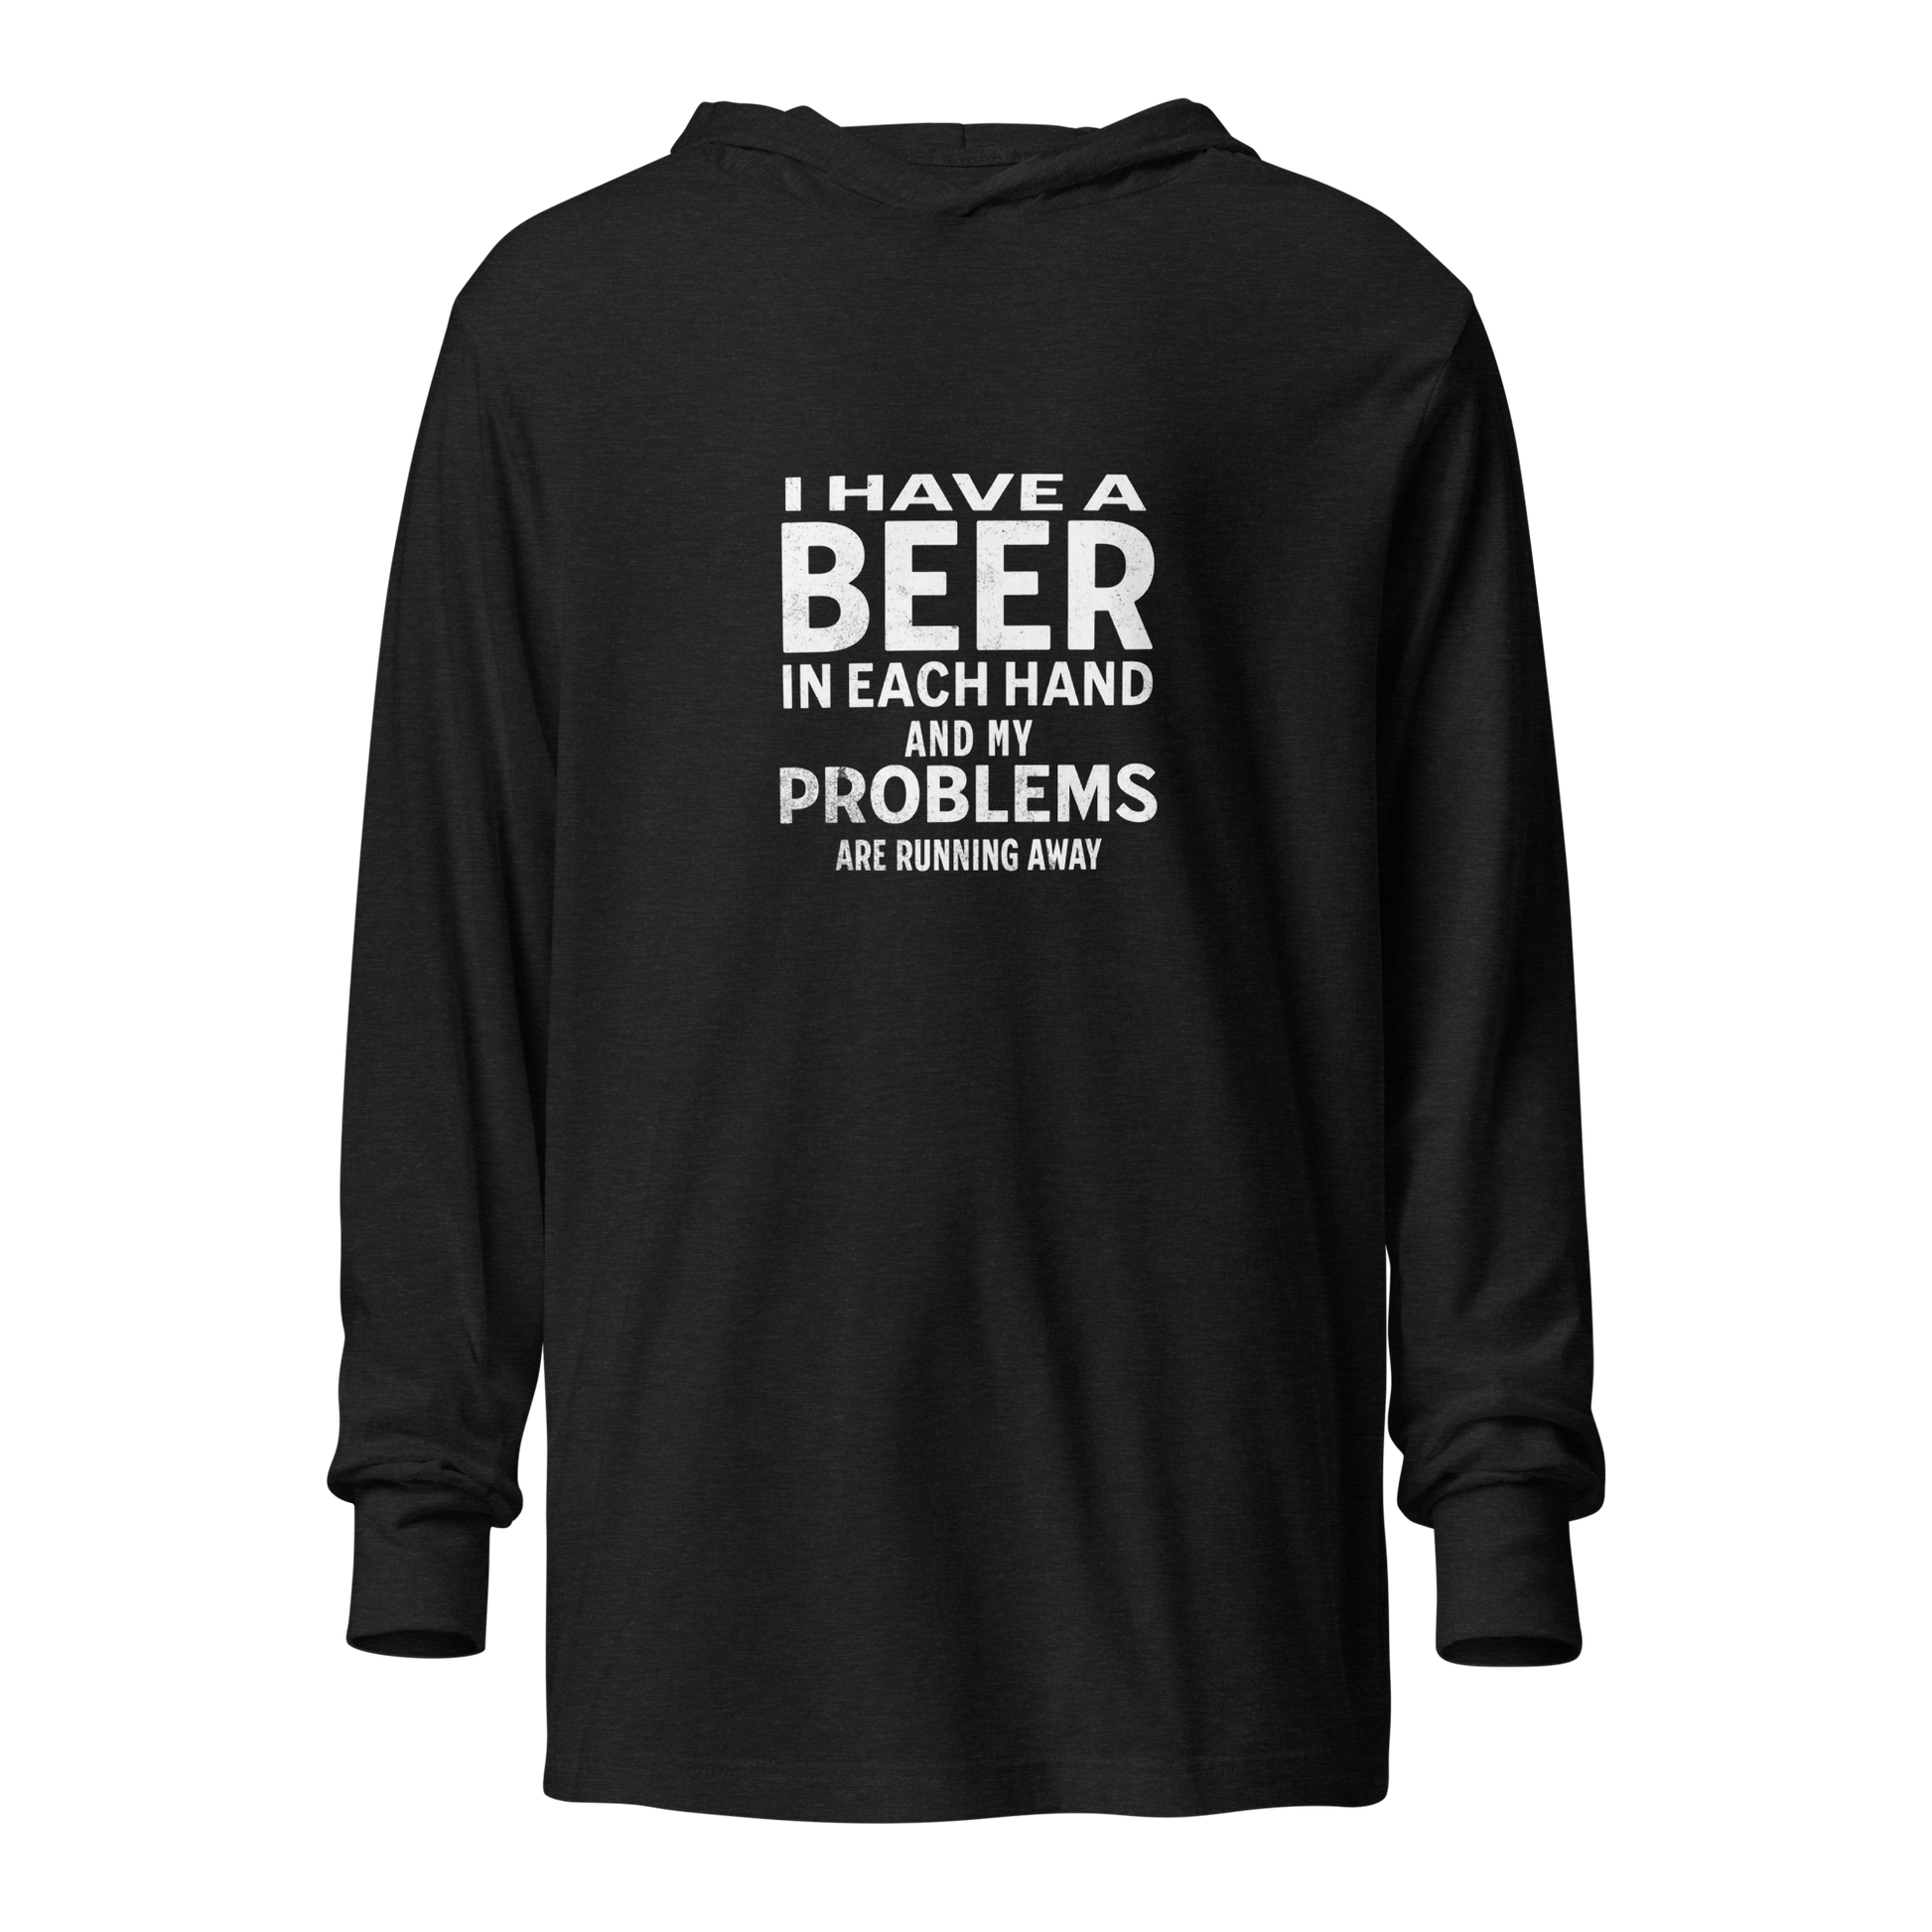 I Have a Beer in Each Hand Lightweight Hoodie - Stylish & Comfy DRINKING,LIGHTWEIGHT HOODIE,MENS,New,SPRING BREAK,UNISEX,WOMENS